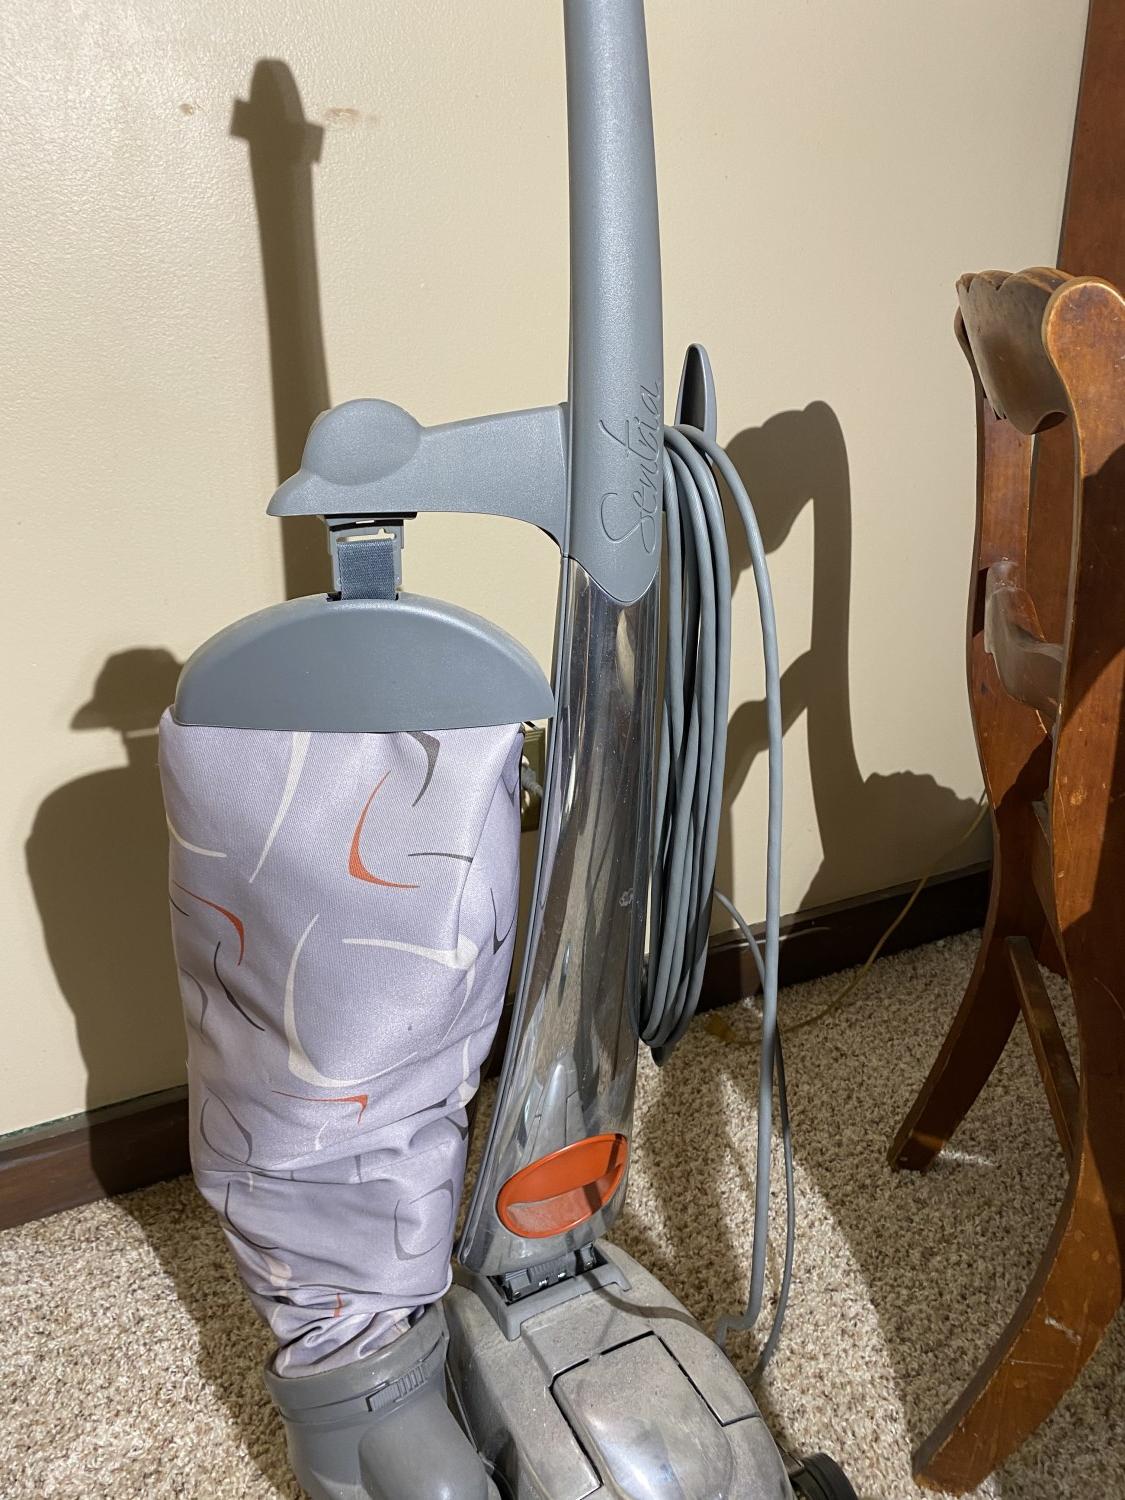 Newer Kirby Vacuum Cleaner w/Accessories